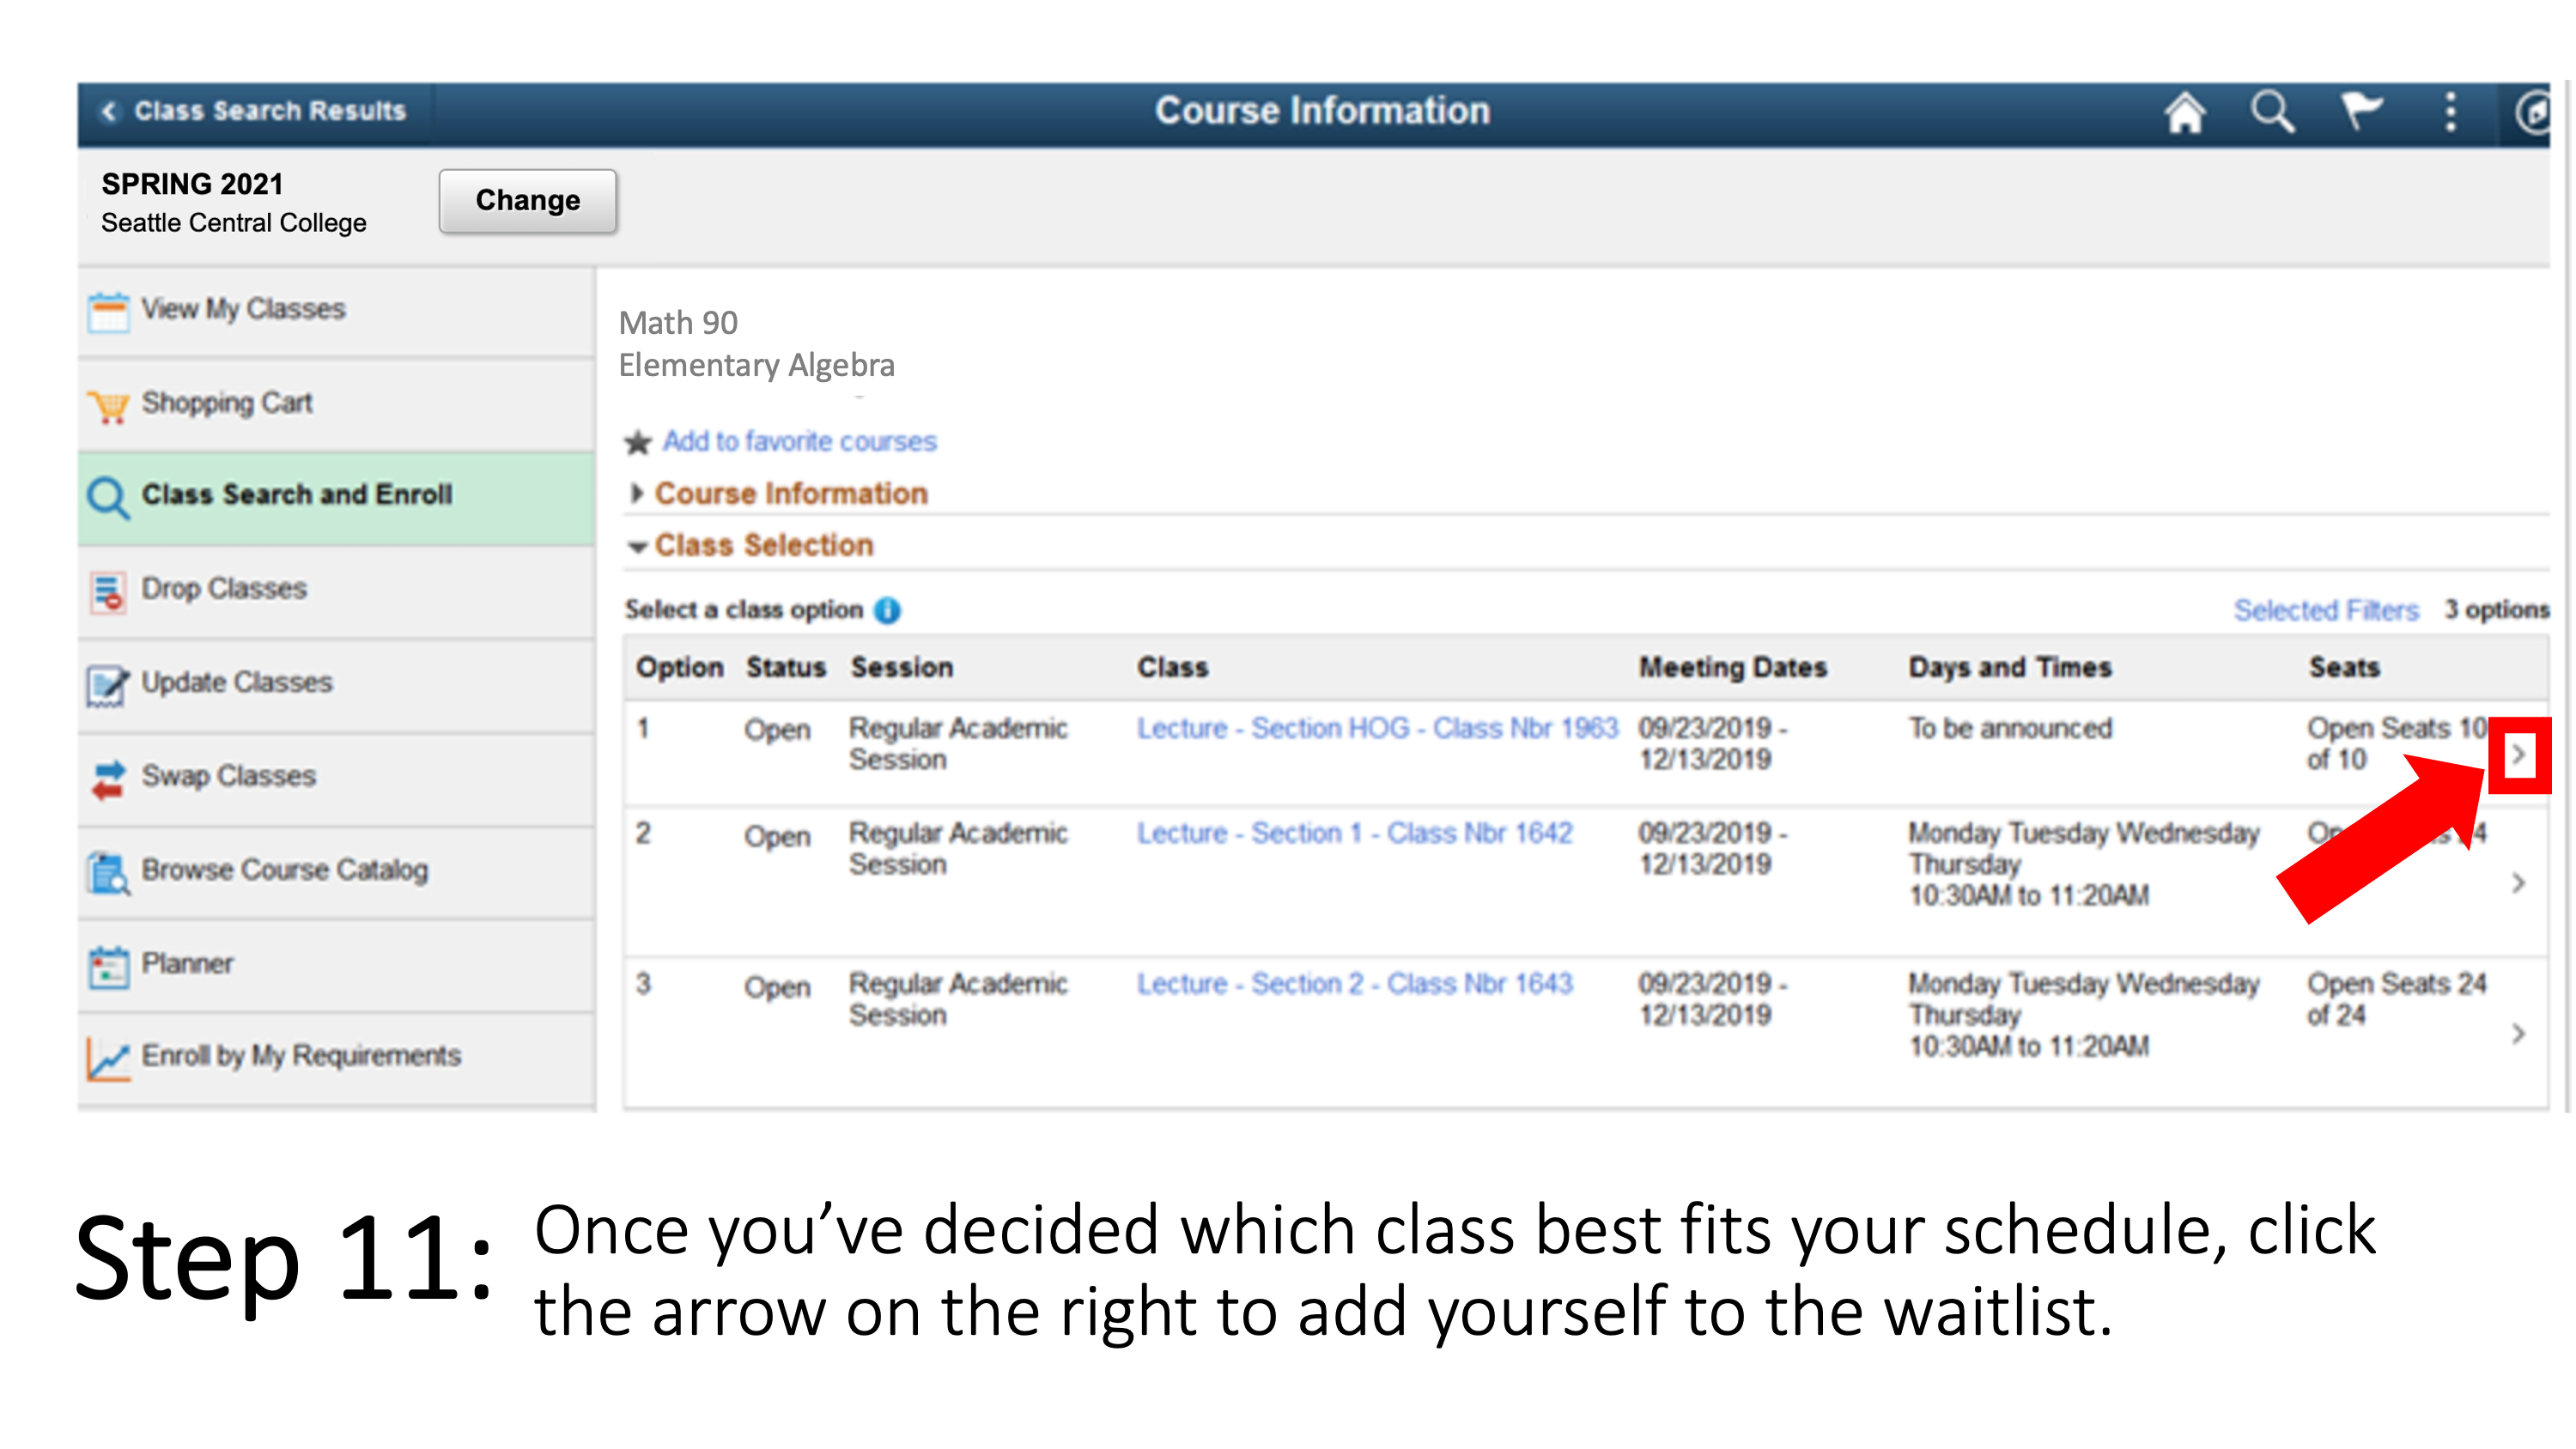 Once you’ve decided which class best fits your schedule, click the arrow on the right to add yourself to the waitlist.